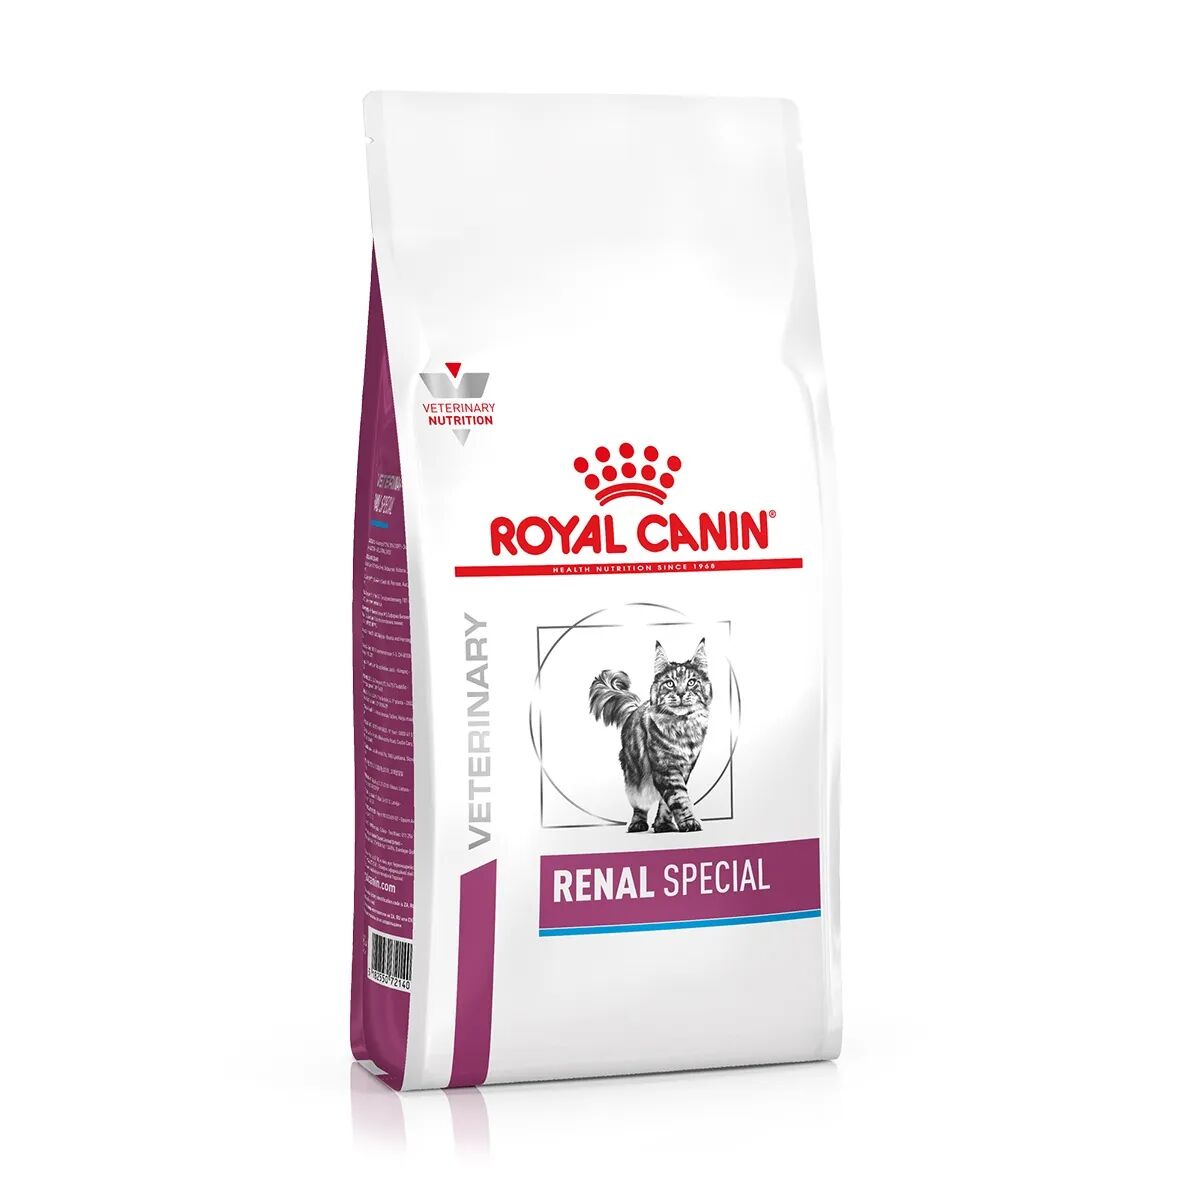 royal canin v-diet renal special gatto 400g